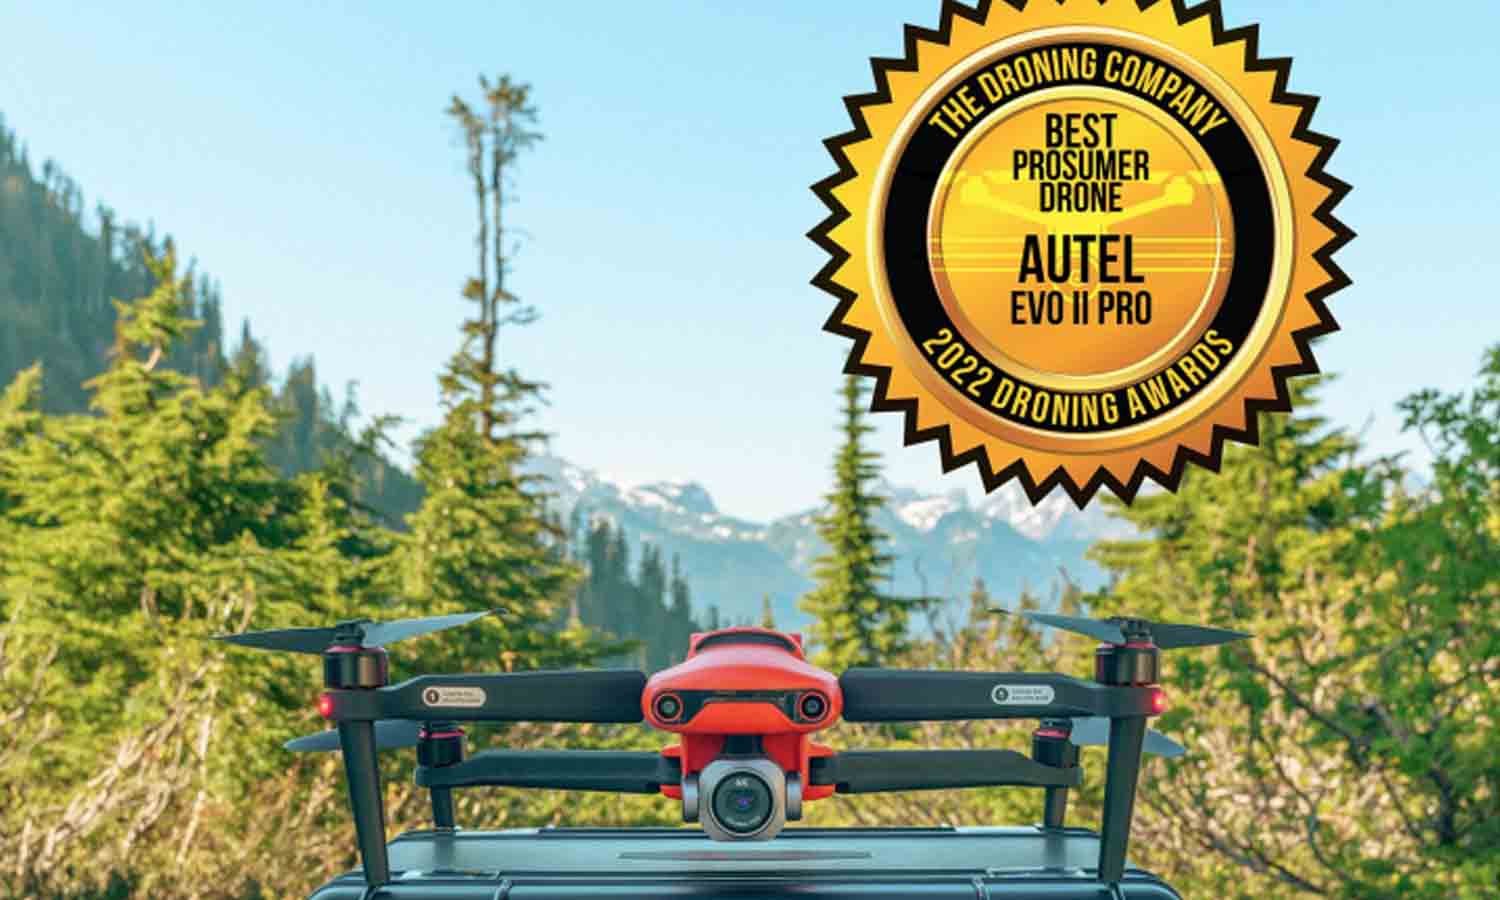 2022 Drone Review: EVO II Pro Named "Best Prosumer Drone of 2022"